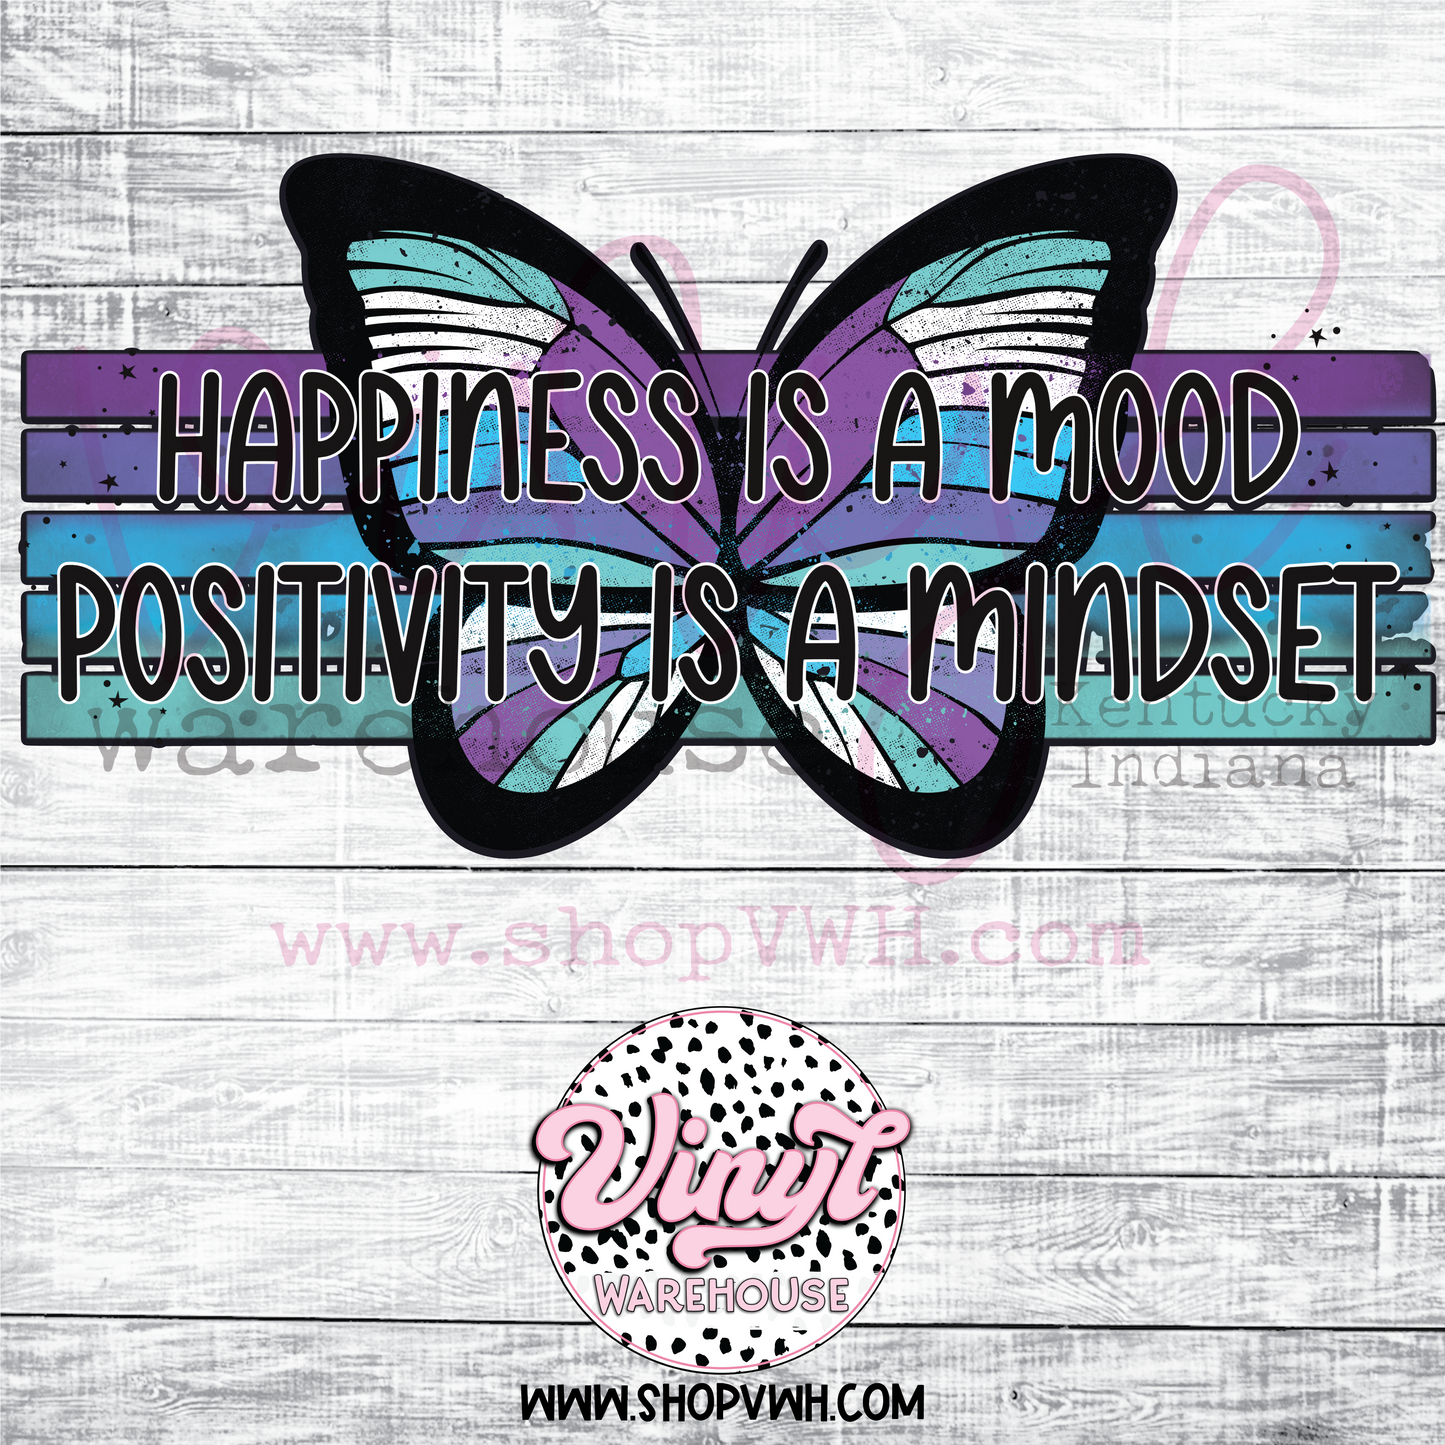 Printed Adhesive Decal - Happiness Is  A Mood